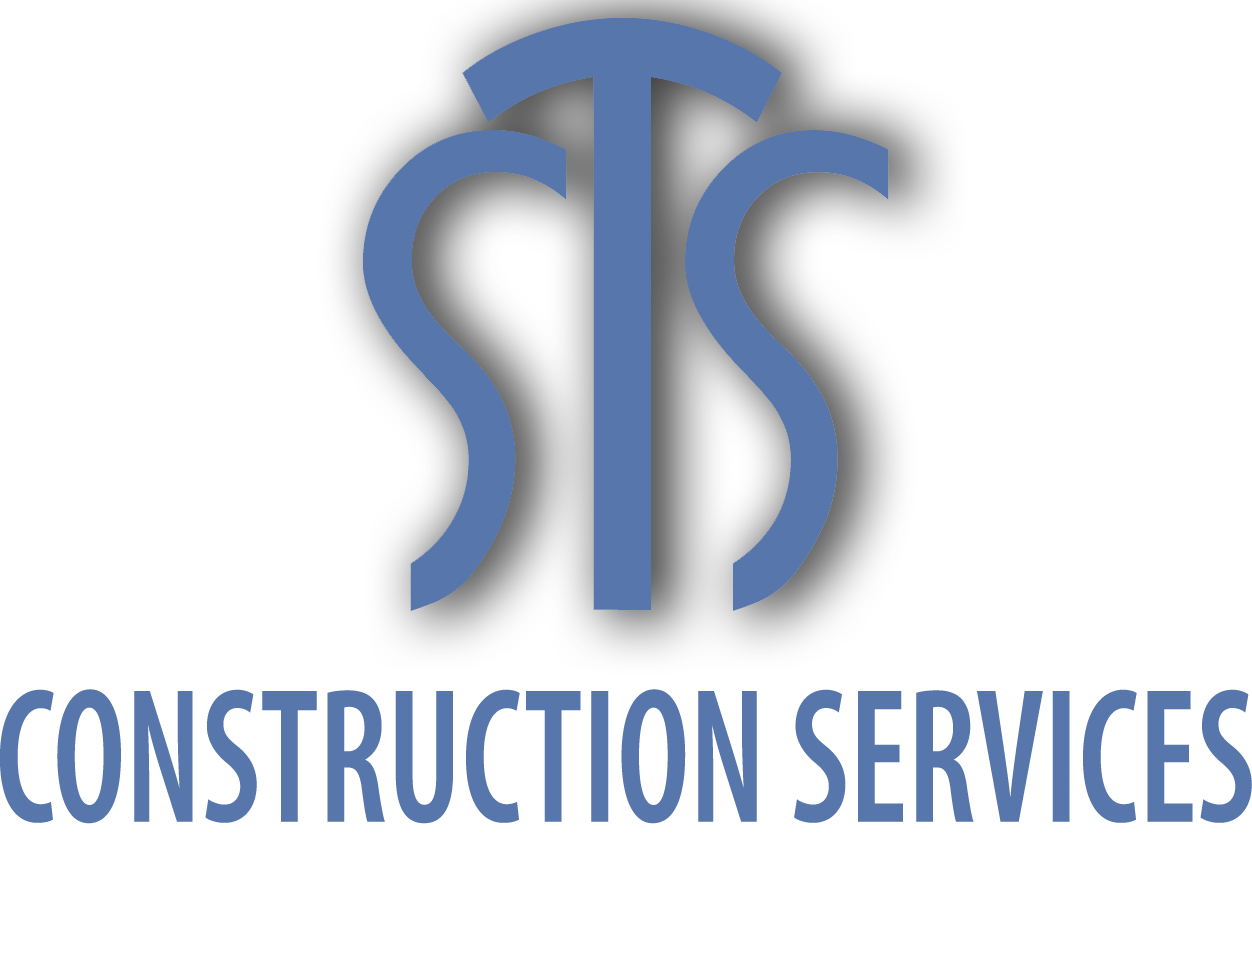 STS Construction Services